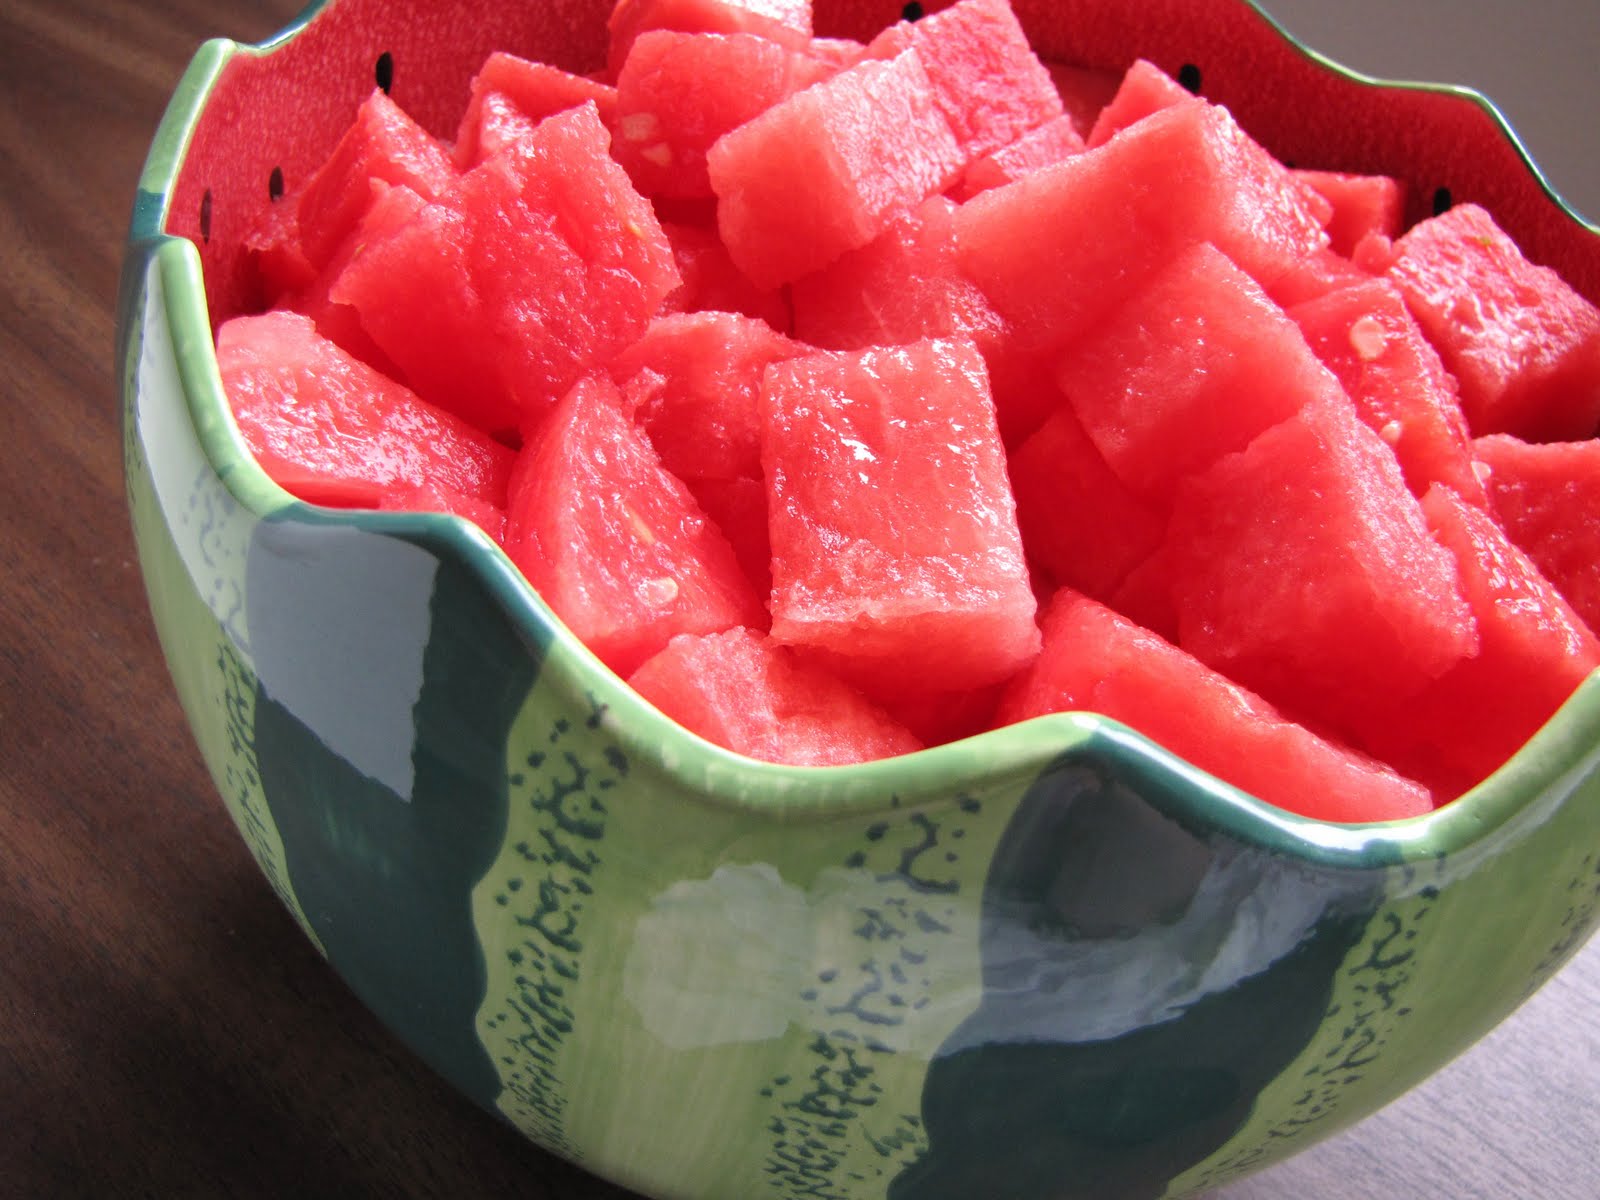 Watermelon, Fruits and health, Benefits of watermelon in summer